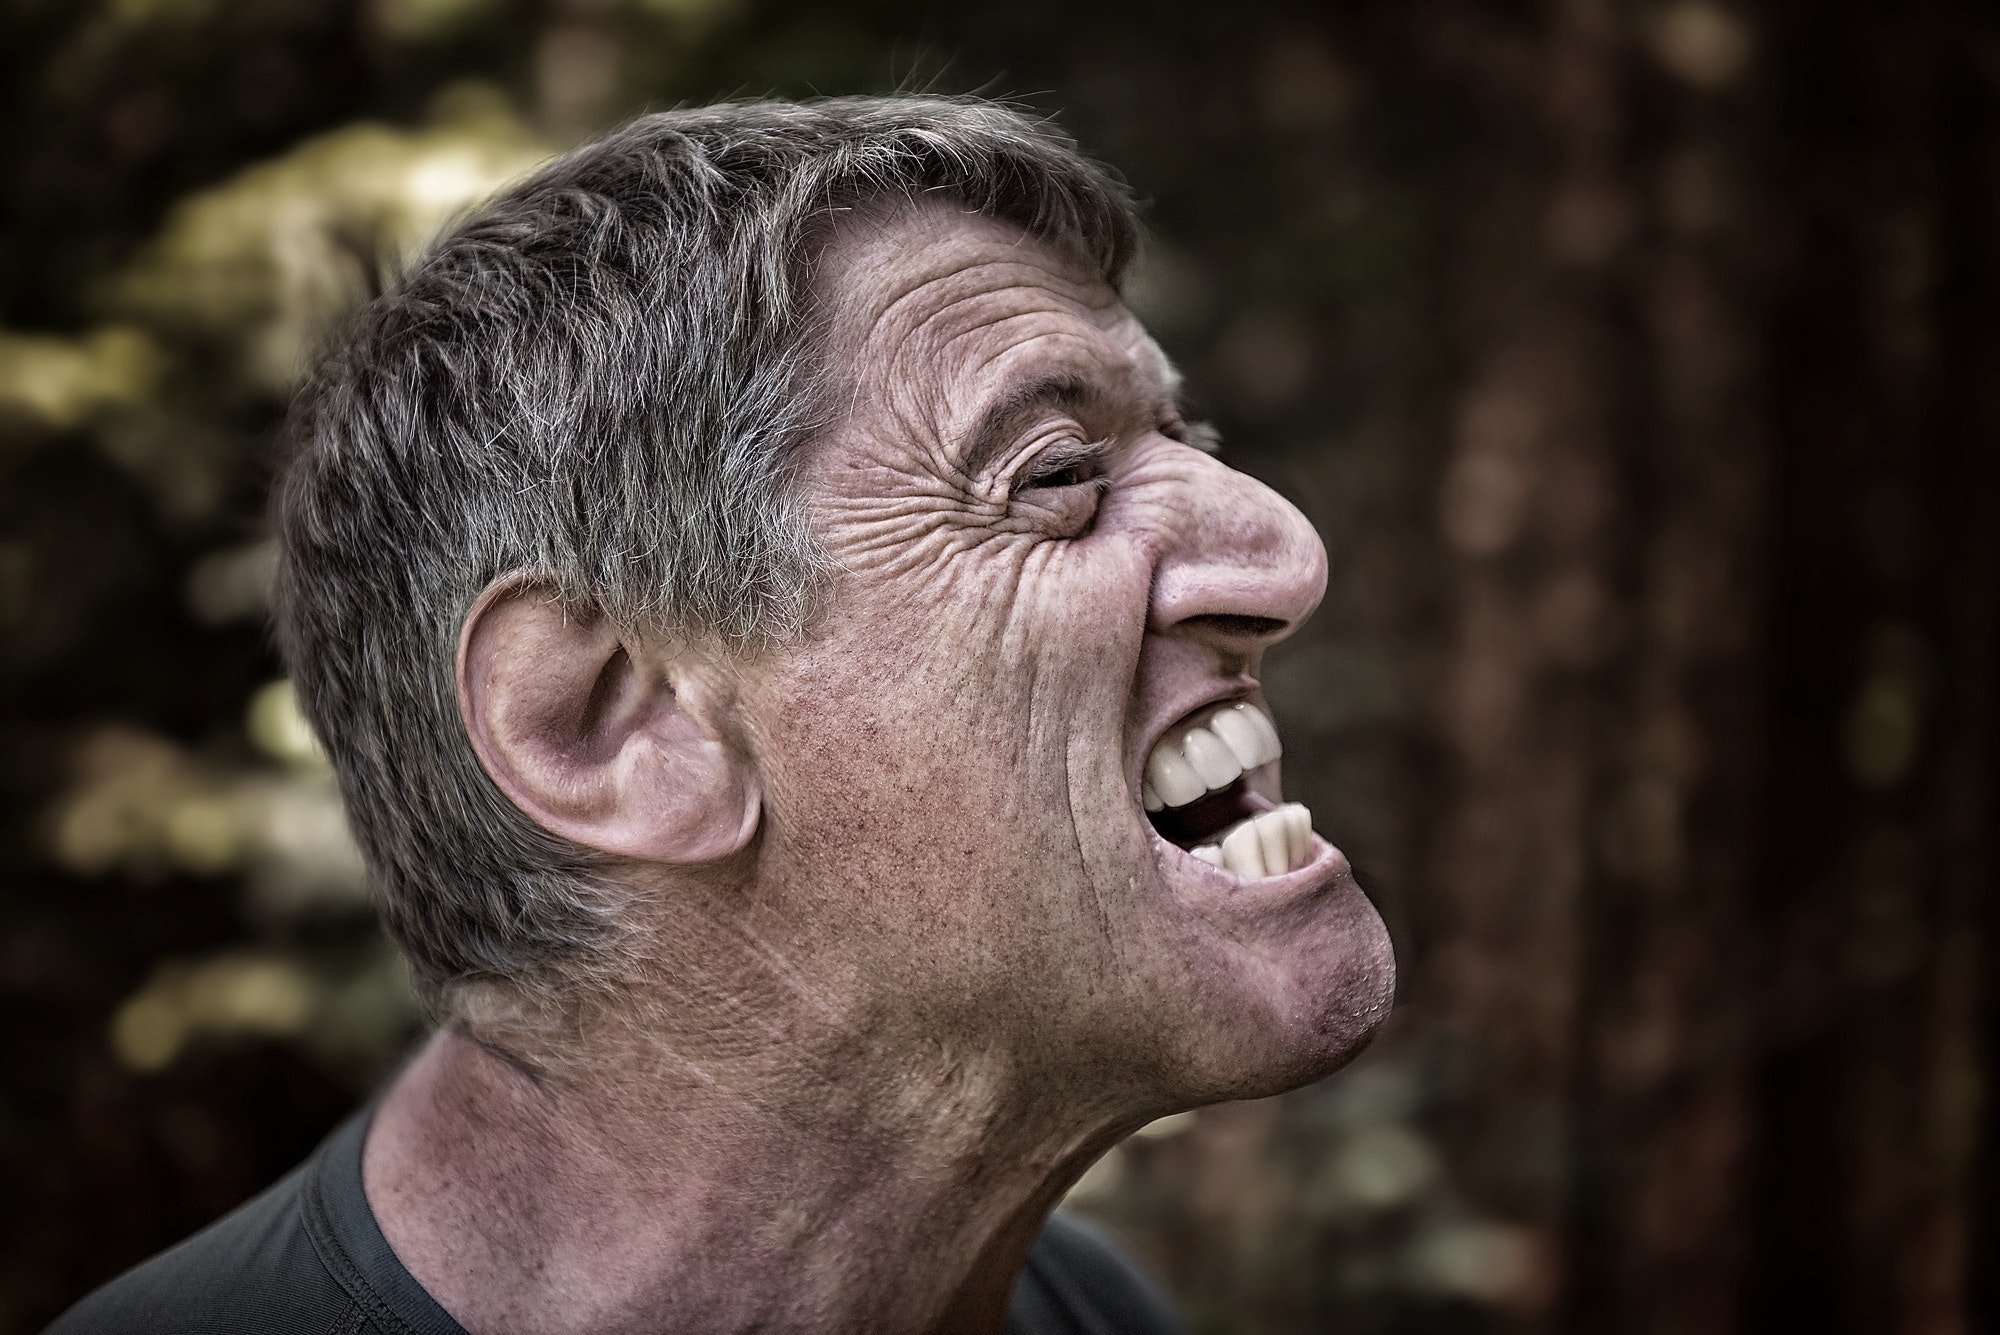 An angry man | Source: Pexels.com